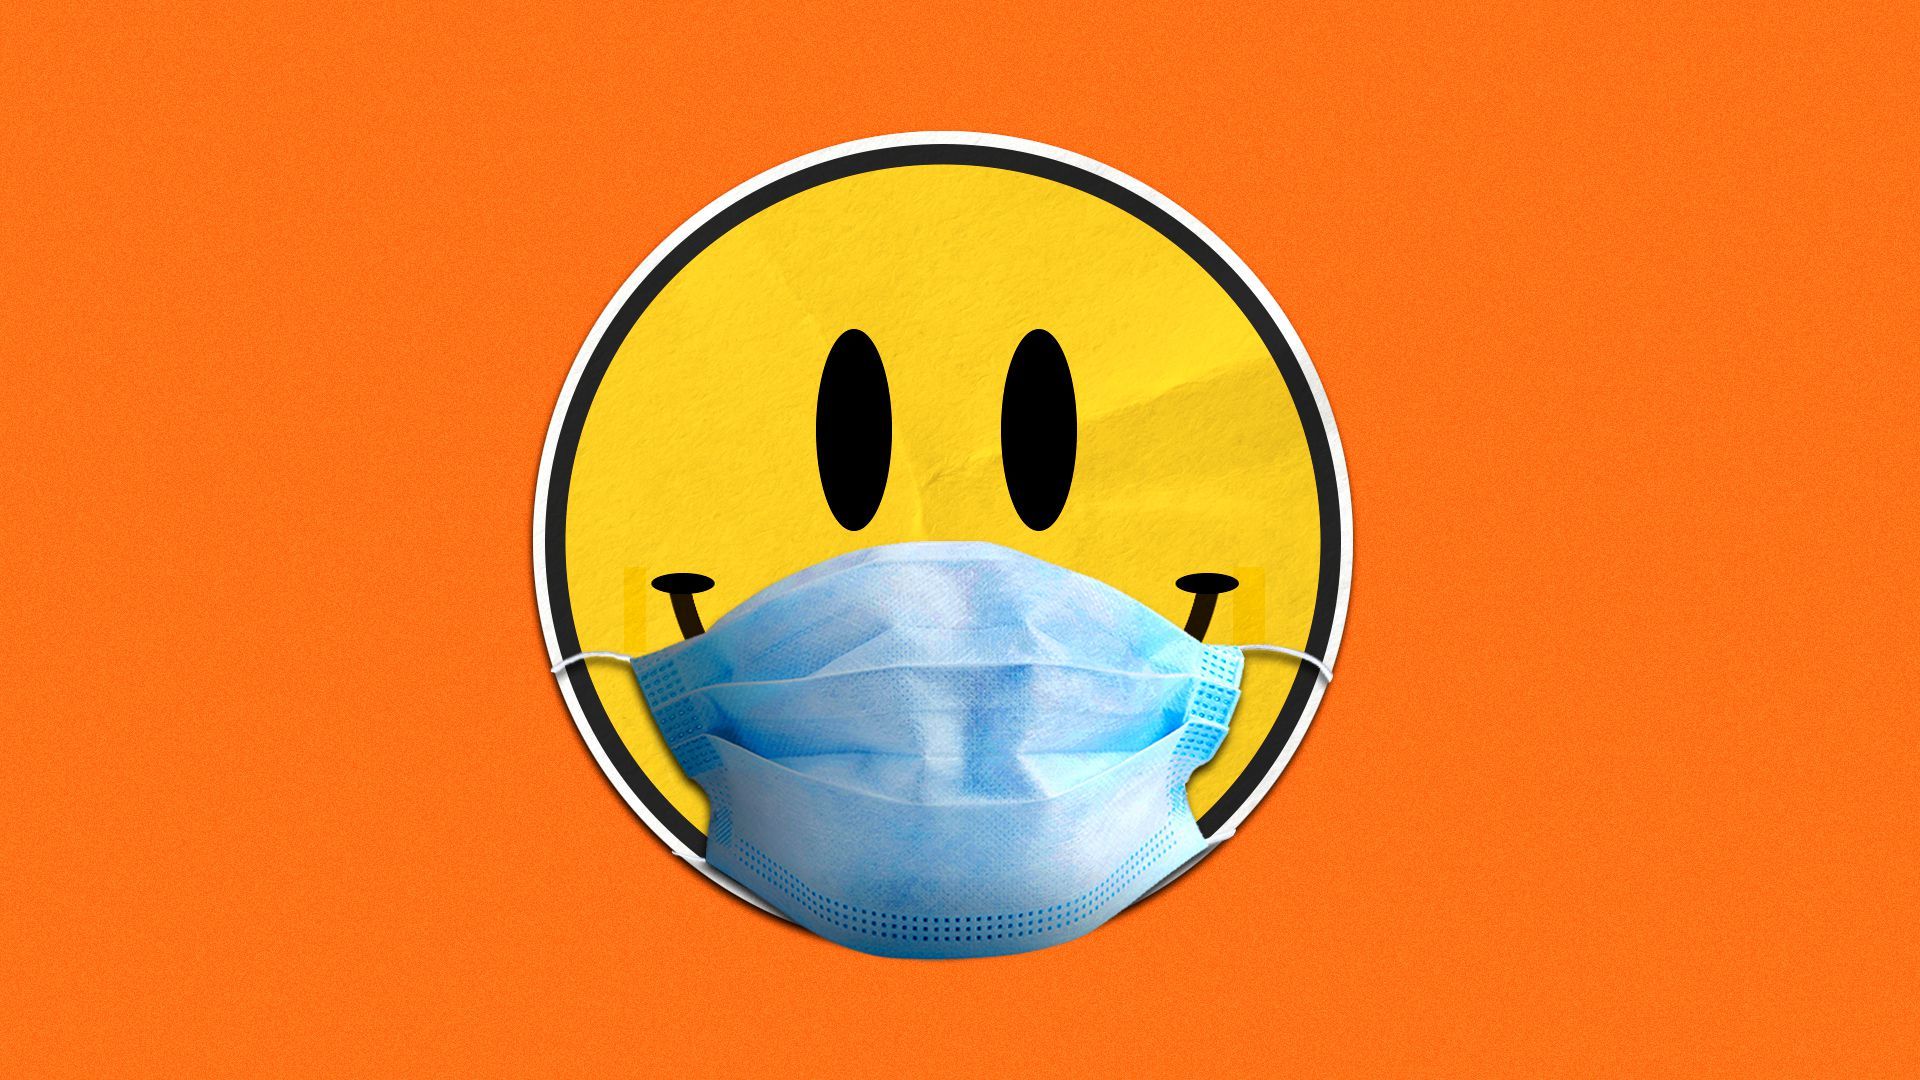 Illustration of a smiley face sticker wearing a face mask